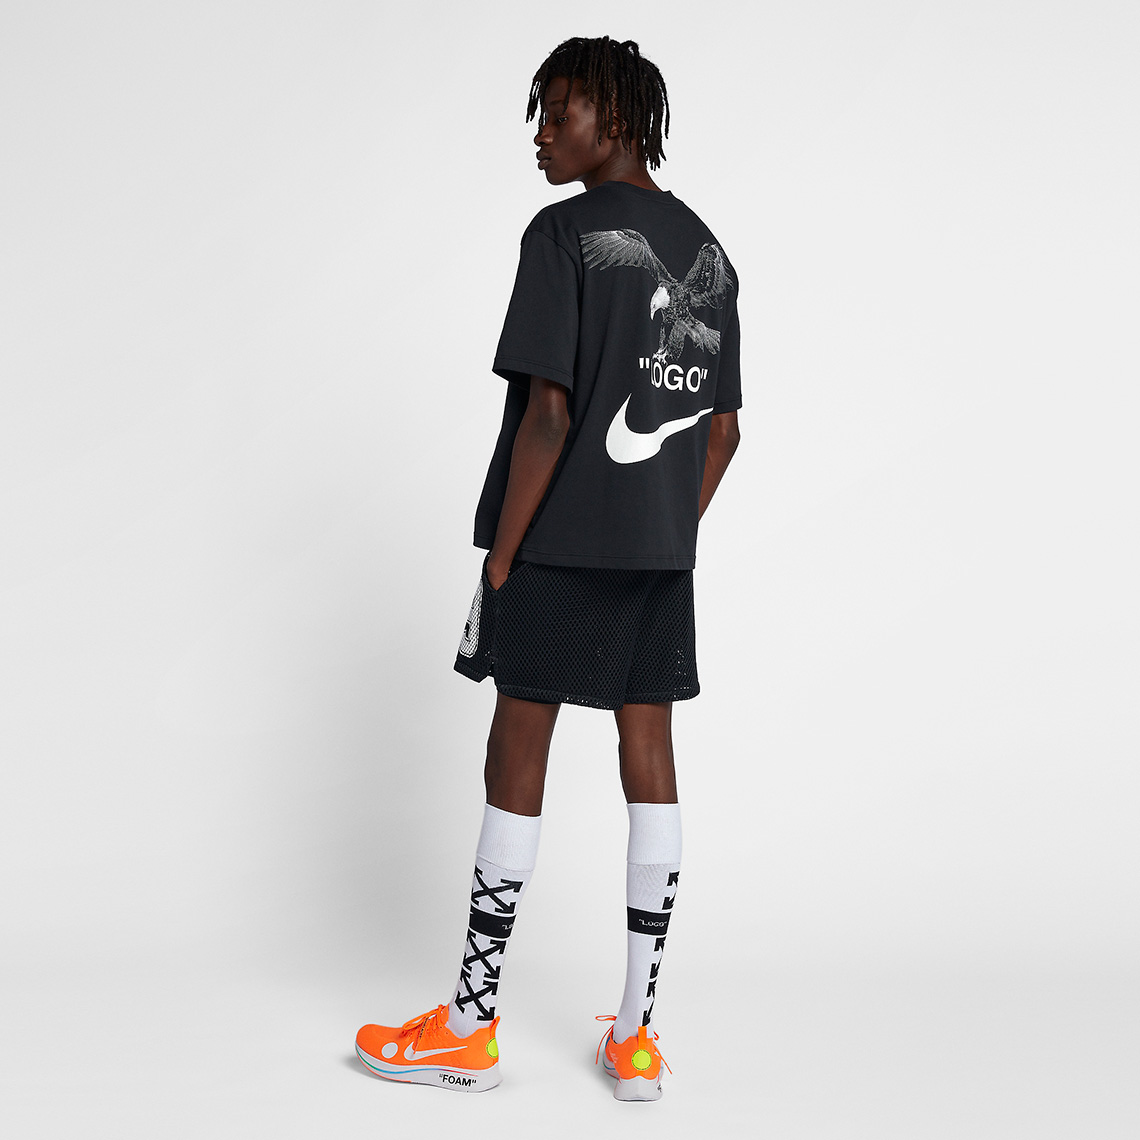 off white nike jersey